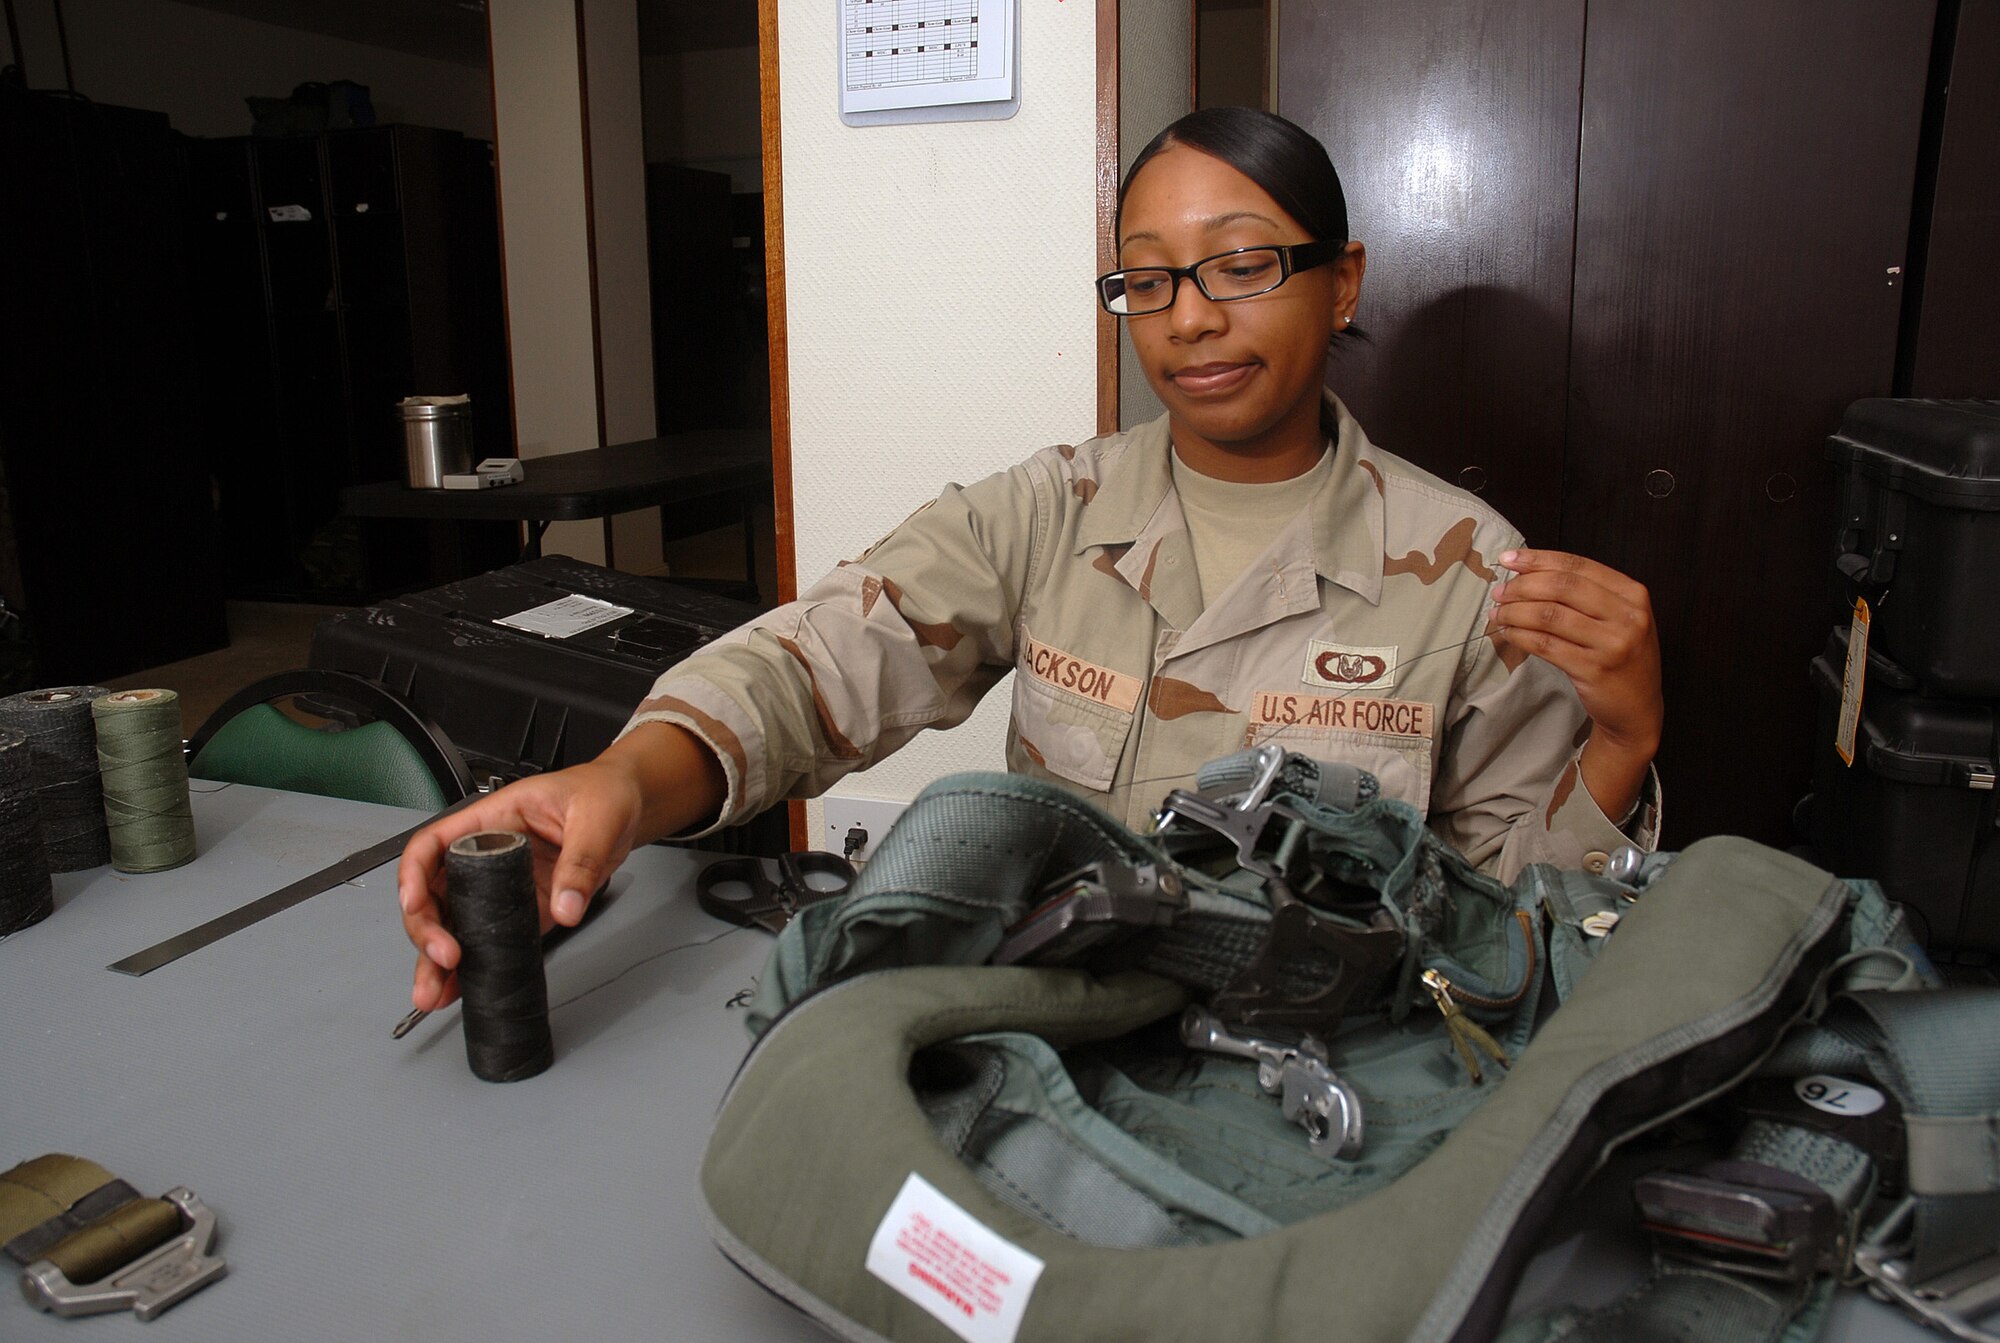 SOUTHWEST ASIA - Staff Sgt. Montrice Jackson, 379TH Operational Support Squadron aircrew life support technician, readies a torso harness for B-1B aircrew members at a Southwest Asia air base Dec. 19. Sergeant Jackson has been selected as a Warrior of the Week by her supervisor. She is deployed from Dyess Air Force Base, Texas. (U. S. Air Force photo/Staff Sgt. Douglas Olsen)